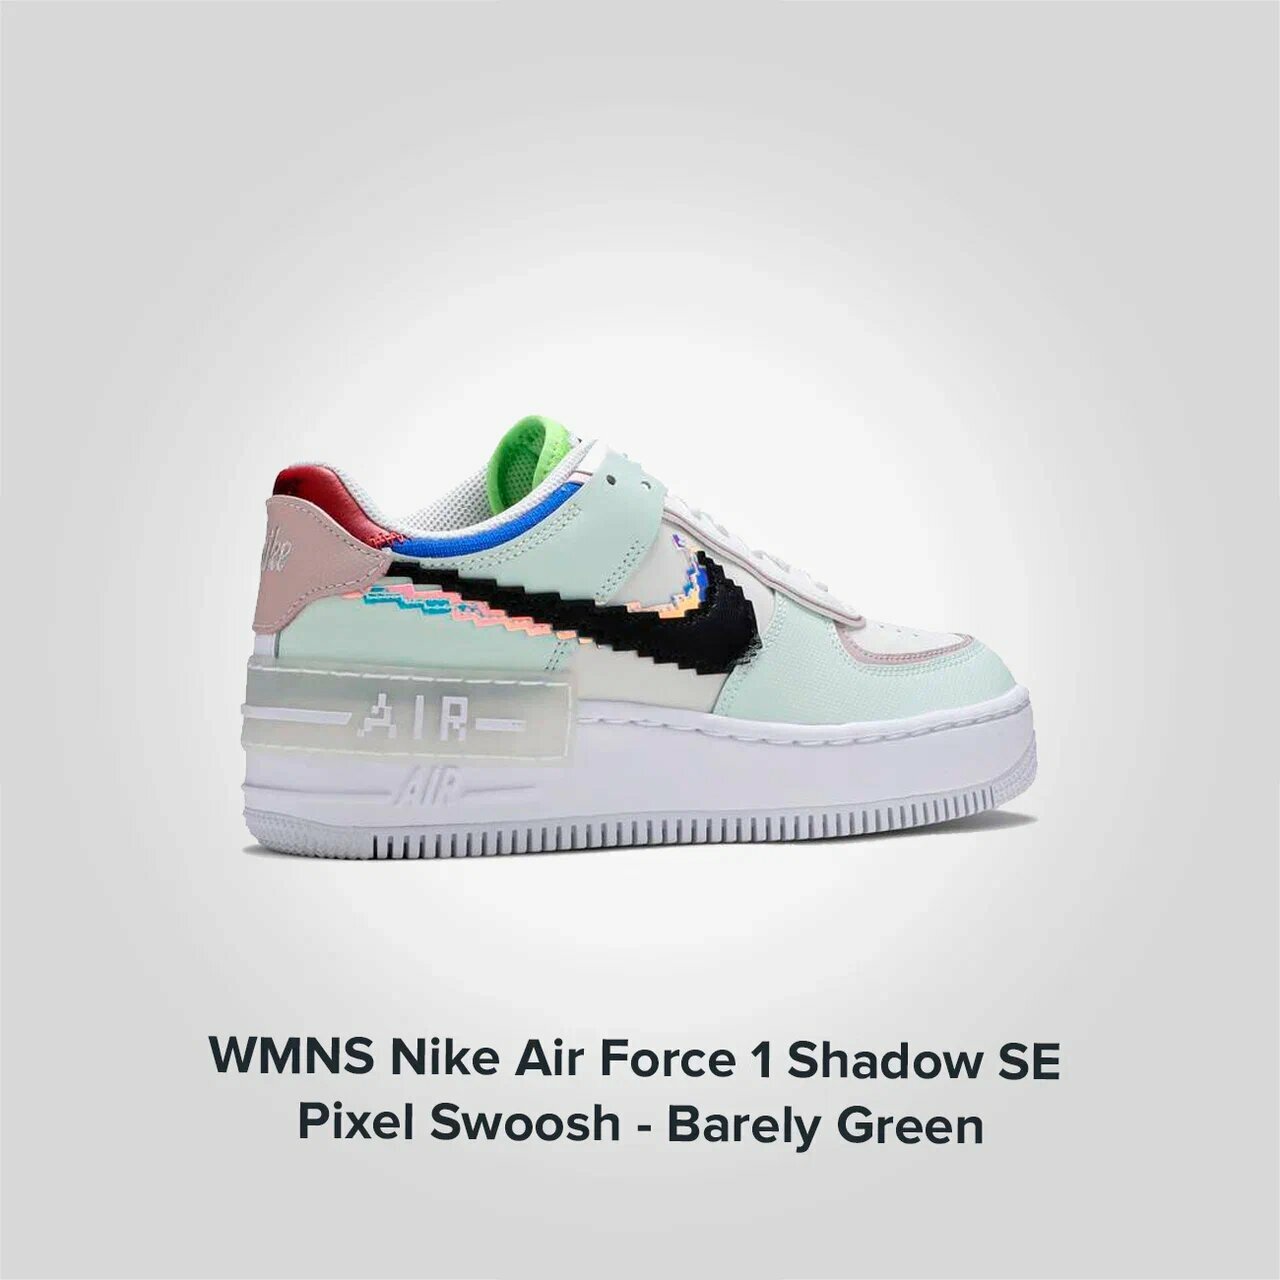 Nike Air Force 1 Shadow SE Pixel Swoosh Barely Green